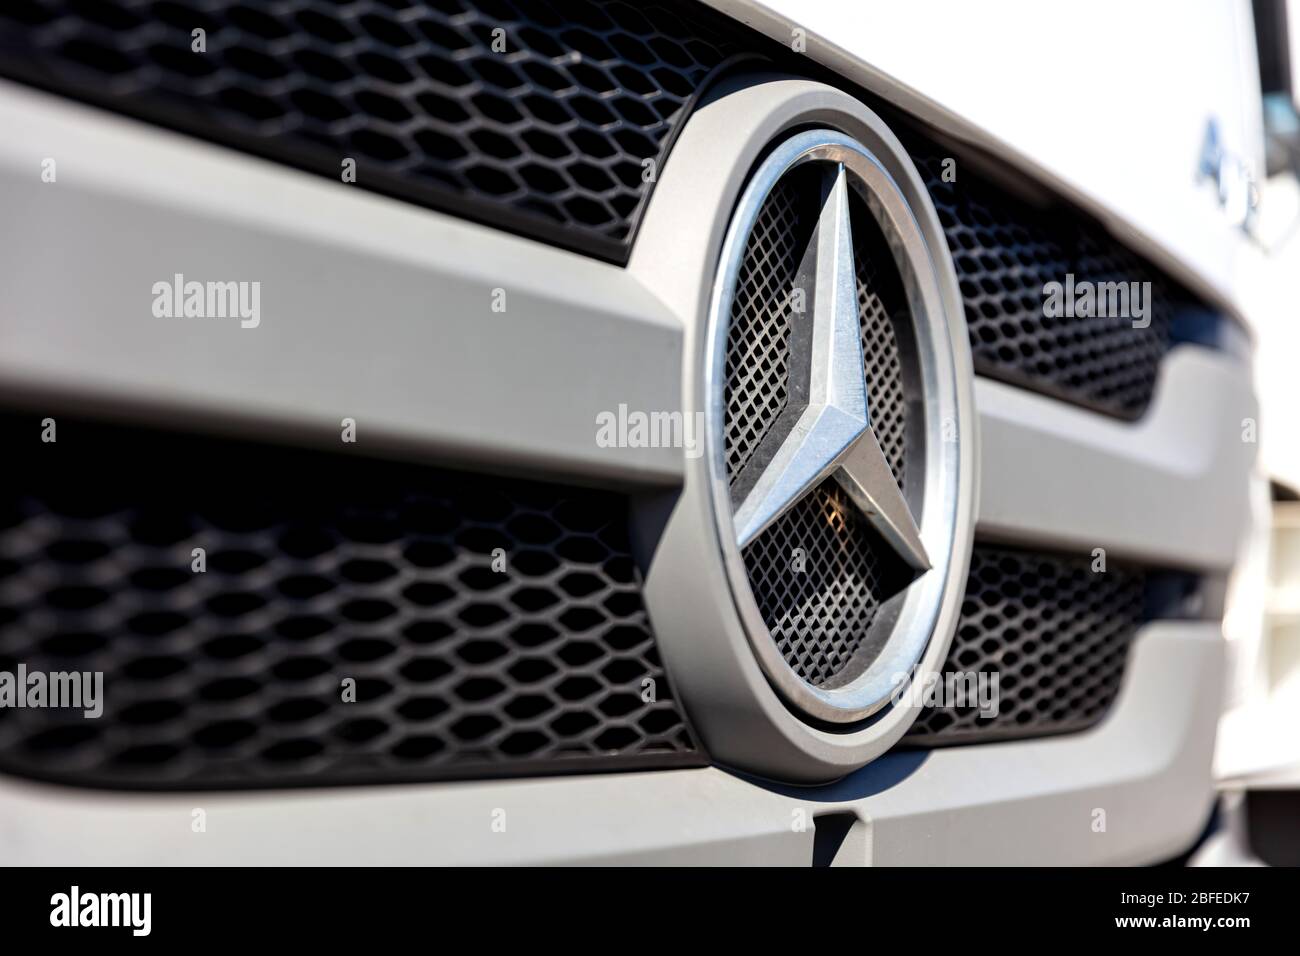 Mercedes-Benz logo at the grill of an Atego truck. Mercedes-Benz is a German global automobile marque and a division of Daimler AG. Stock Photo